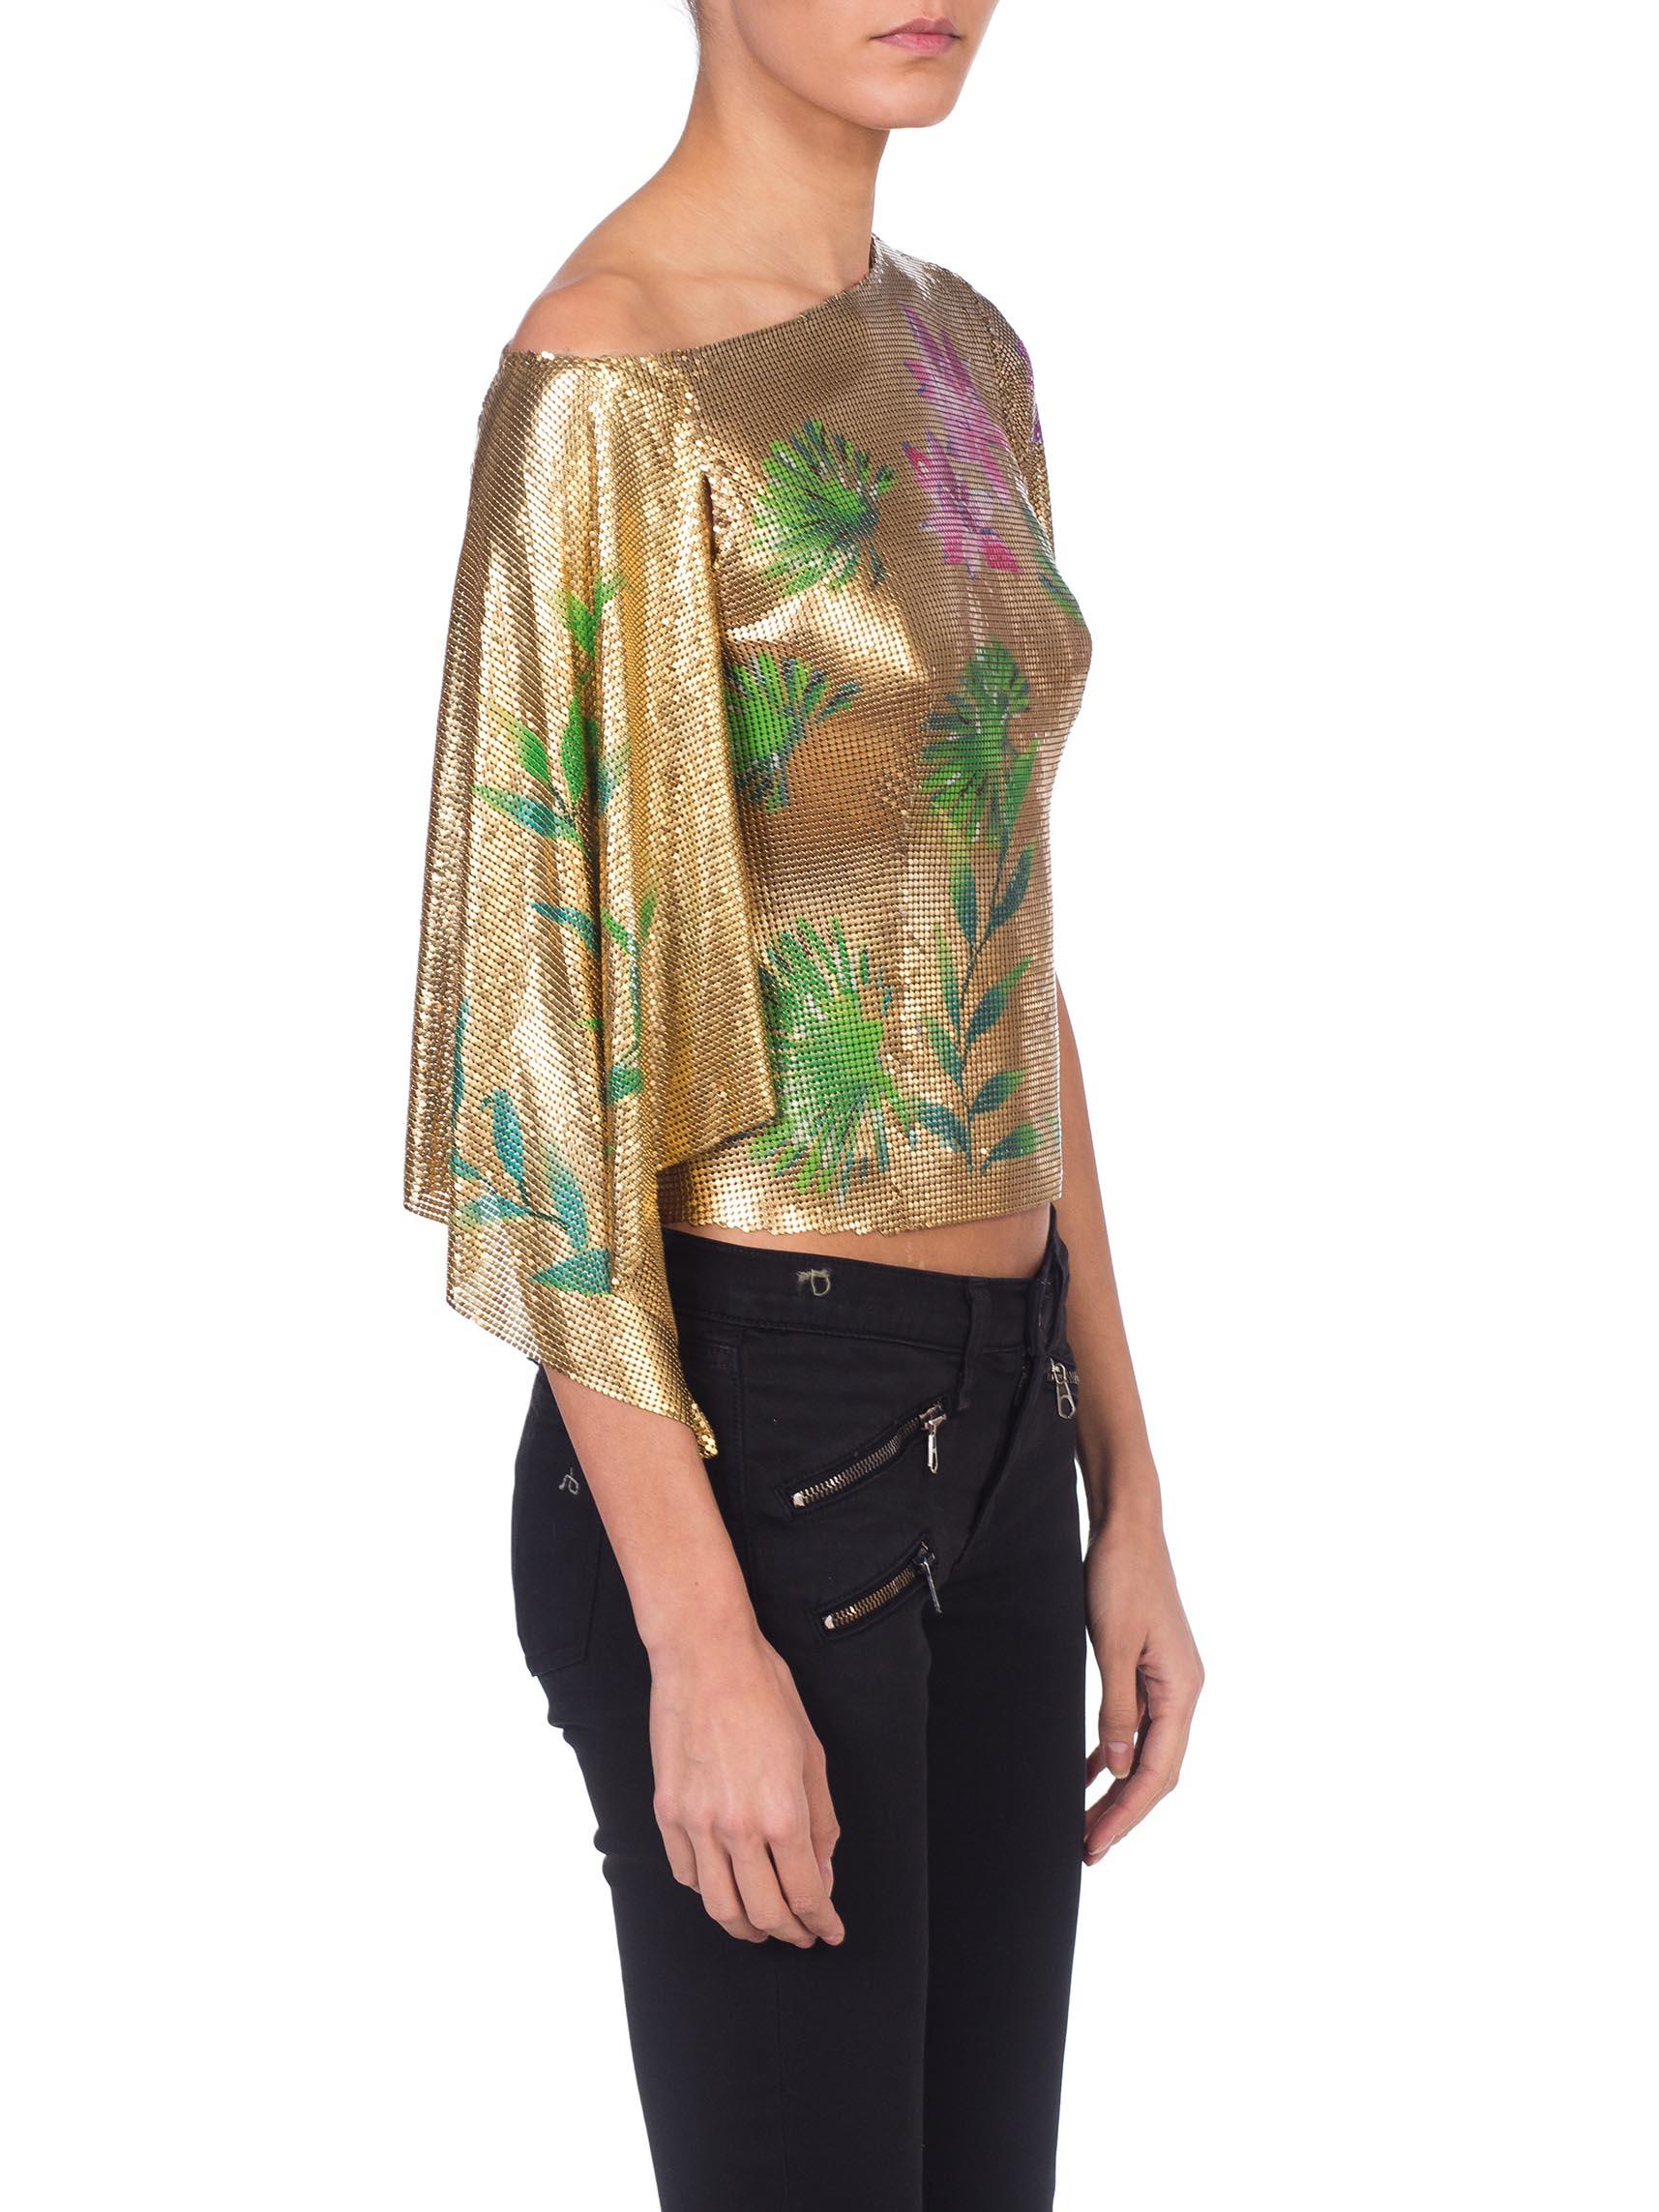 2000S GIANNI VERSACE Jlo Collection Tropical Gold Metal Mesh One Sleeve Top In Excellent Condition For Sale In New York, NY